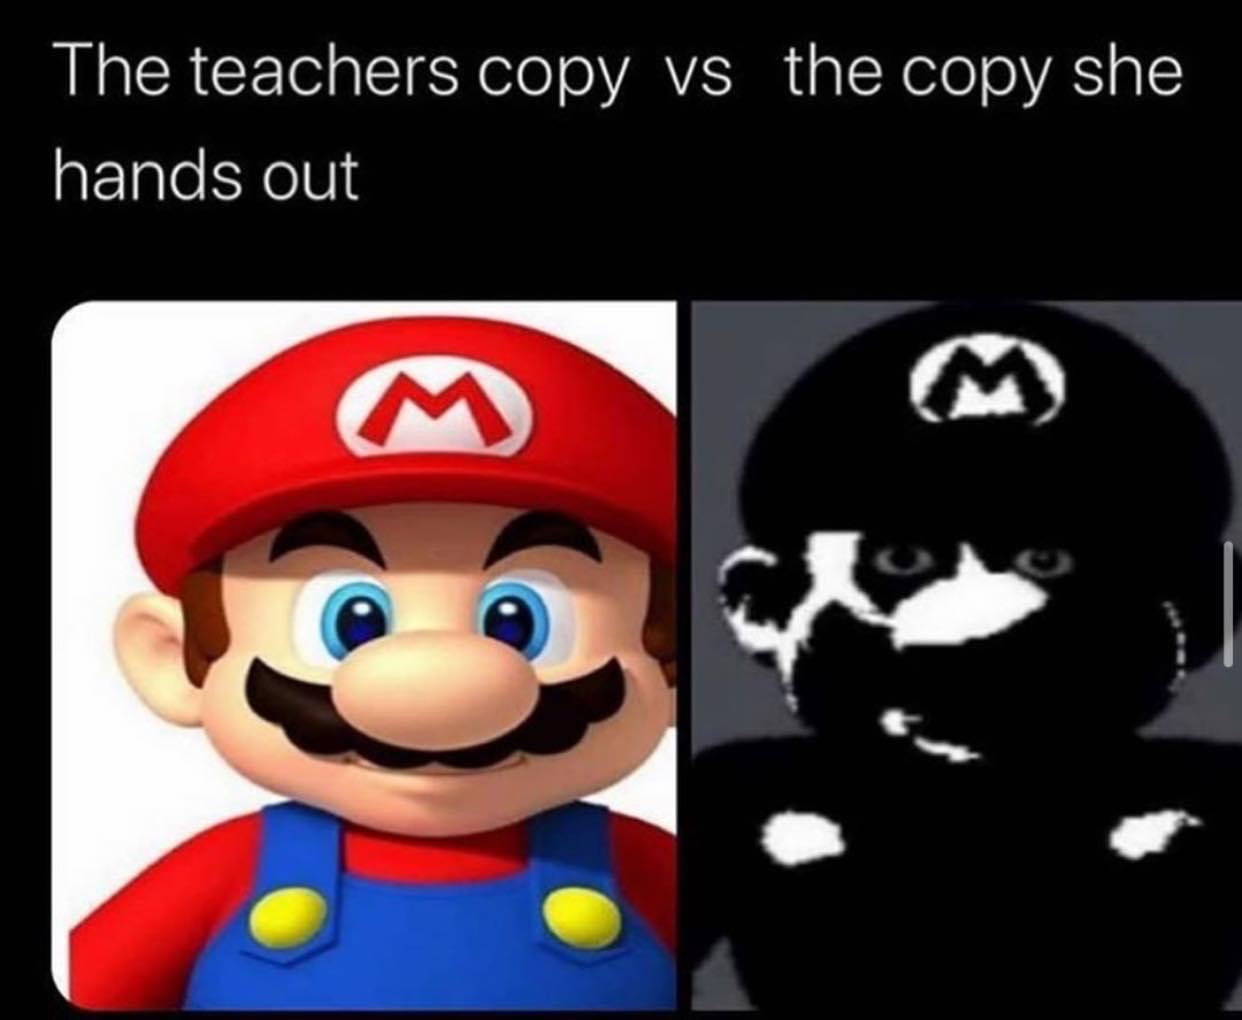 daily juicy memes 262 - The teachers copy vs the copy she hands out